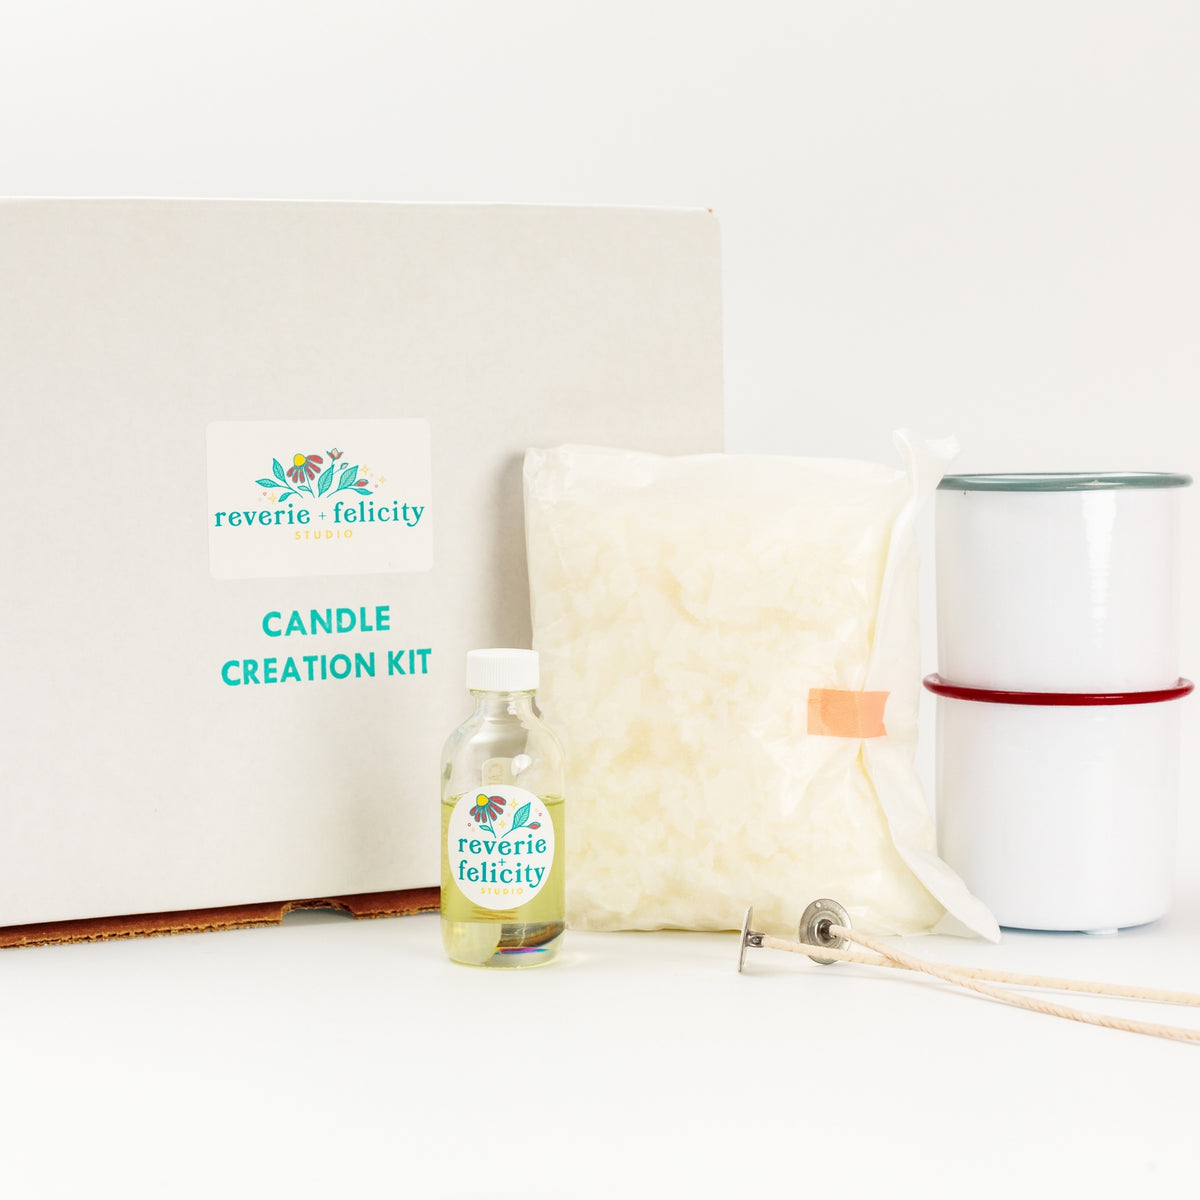 Home Candle Kits are Coming Your Way! — The Candle Studio